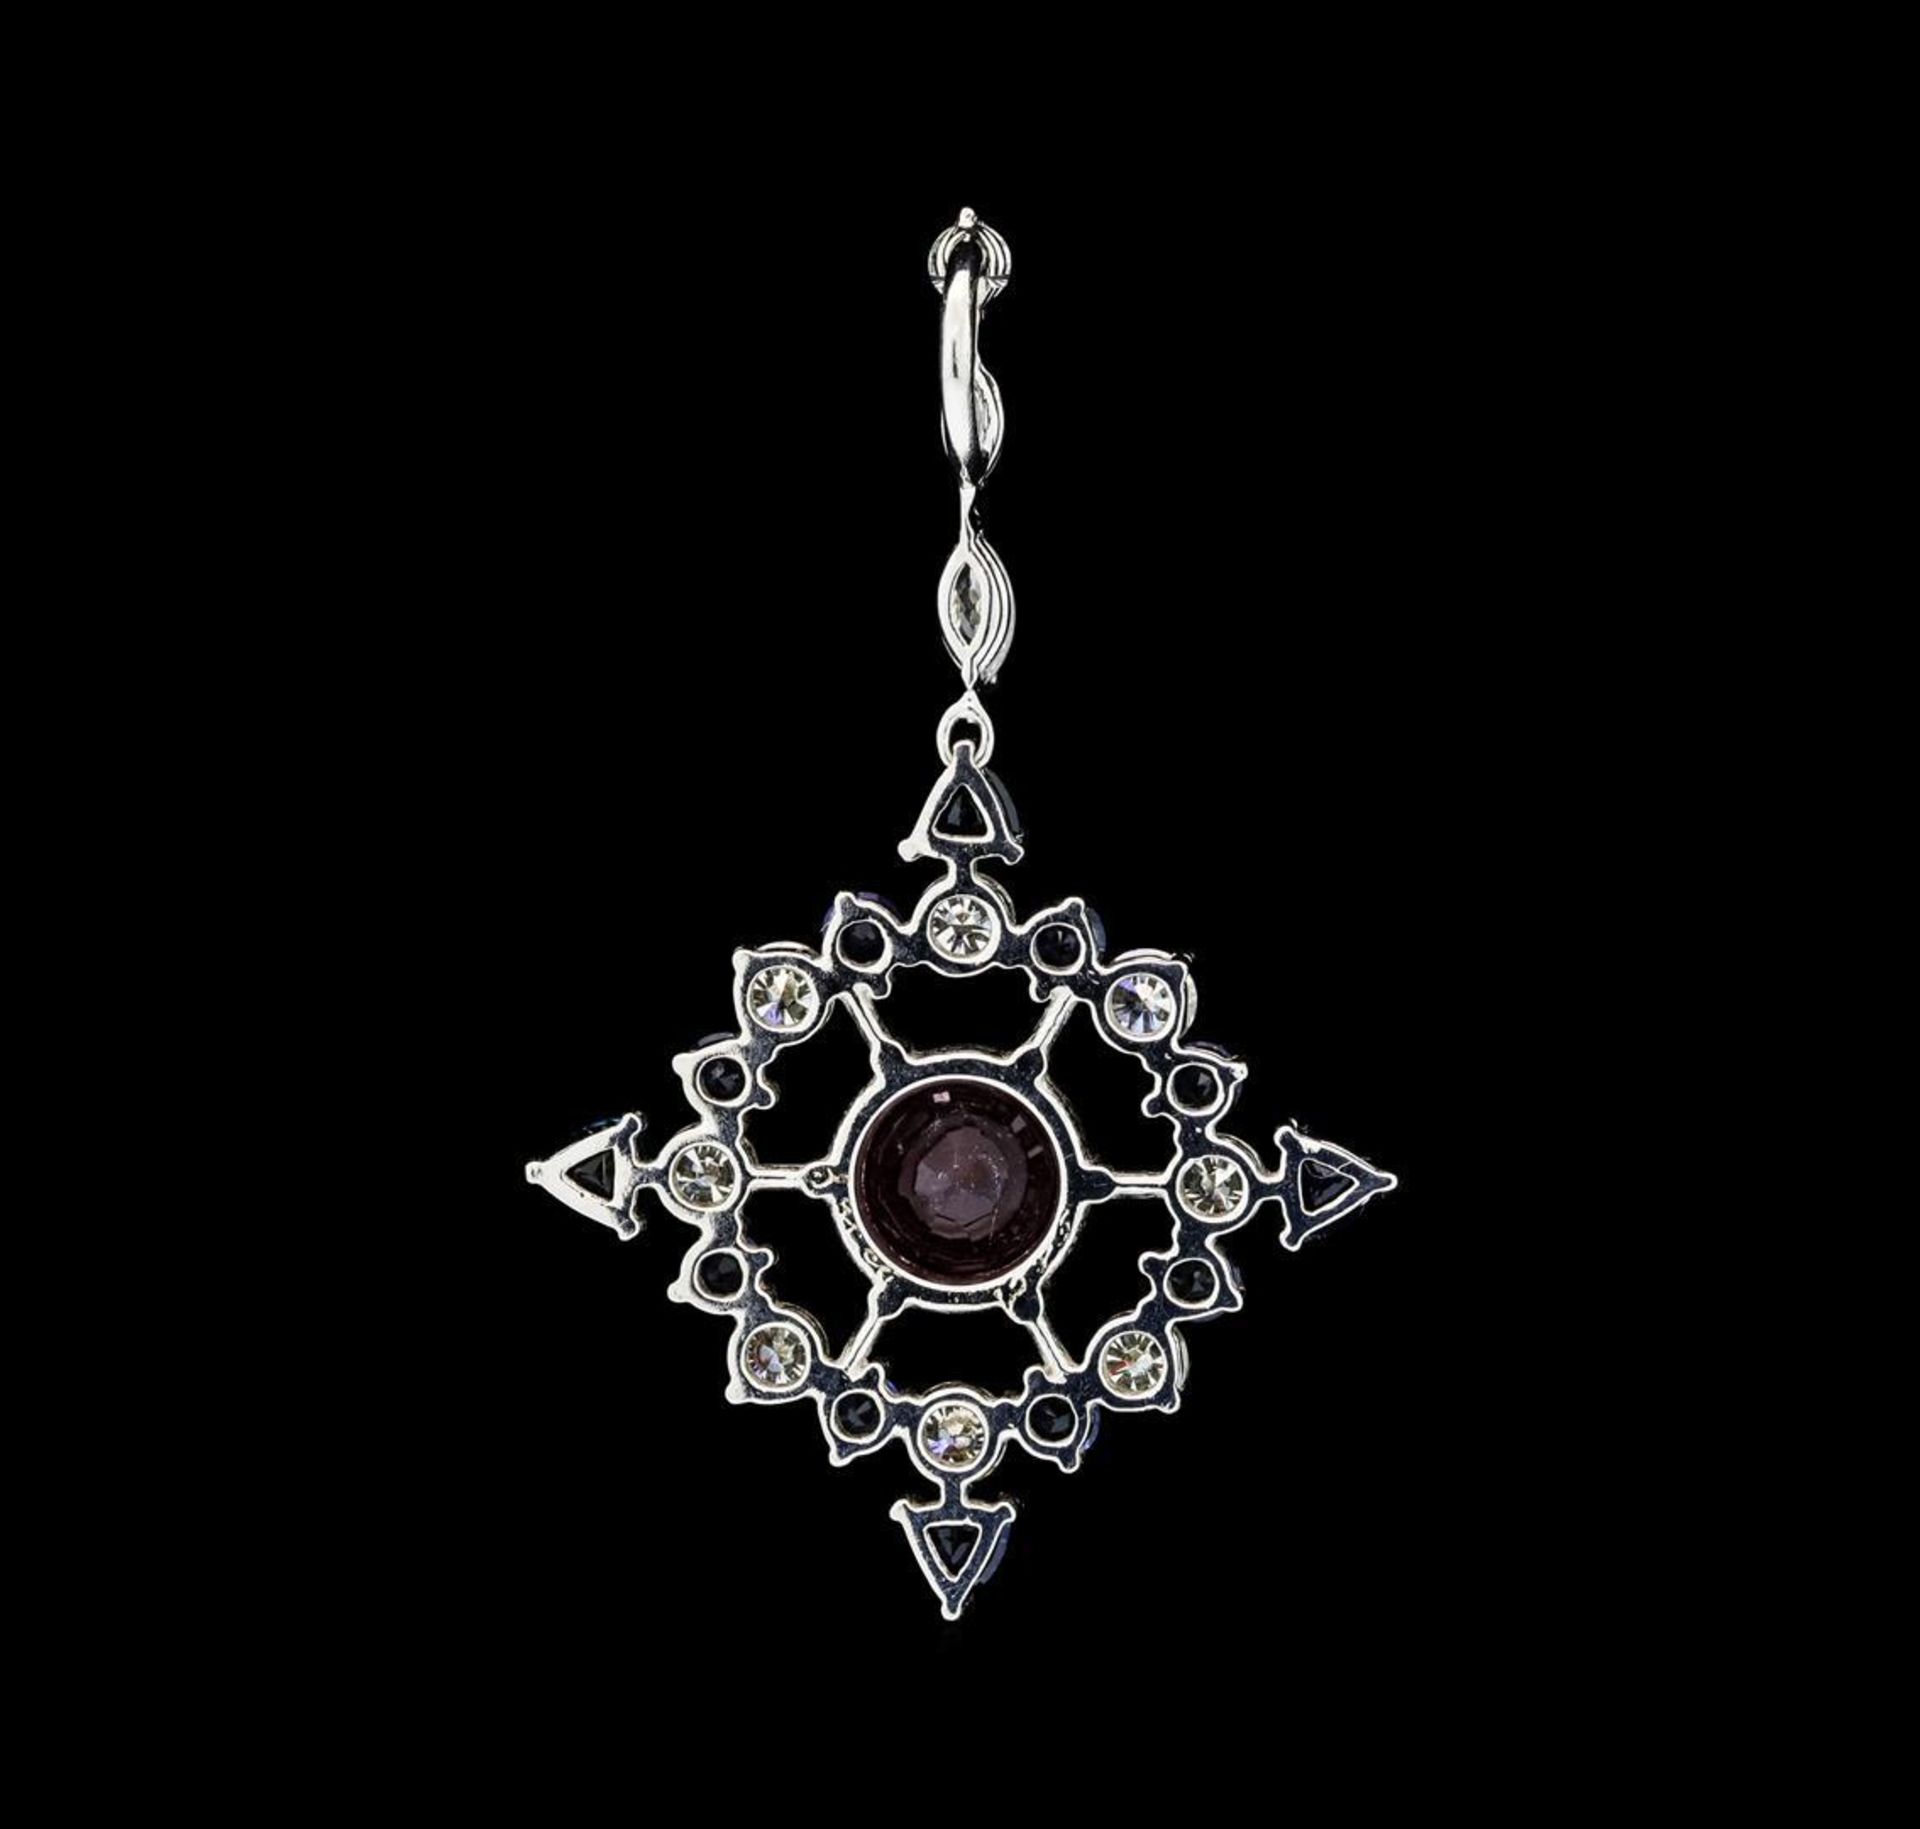 2.22 ct Ruby, Sapphire and Diamond Pendant - 14KT White Gold - Image 2 of 4